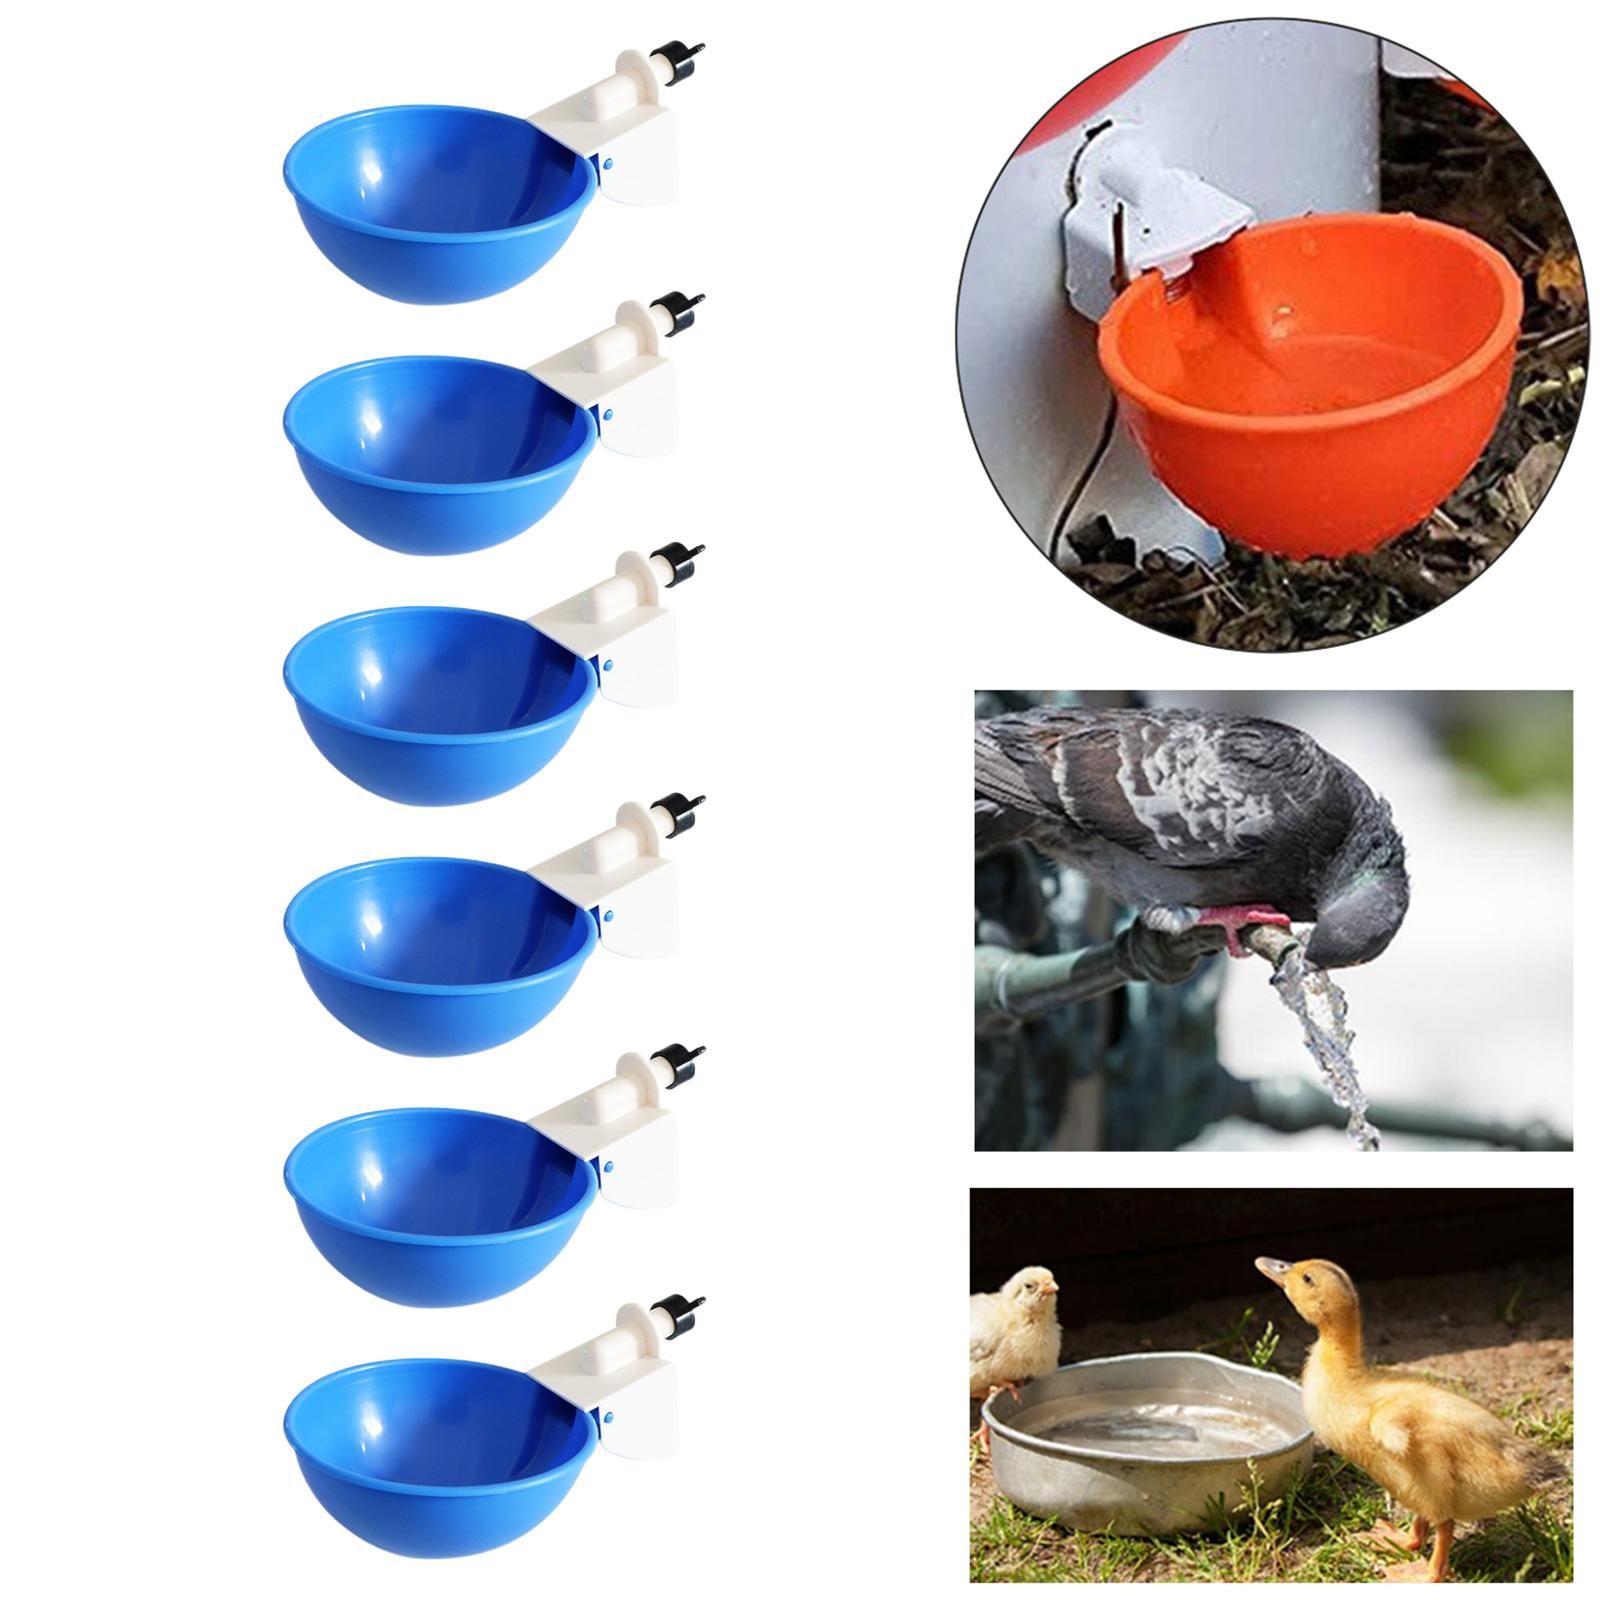 6 Pieces Chicken Drinkers Water Bowl Plastic Drinking Bowls for Quail Chicks Blue